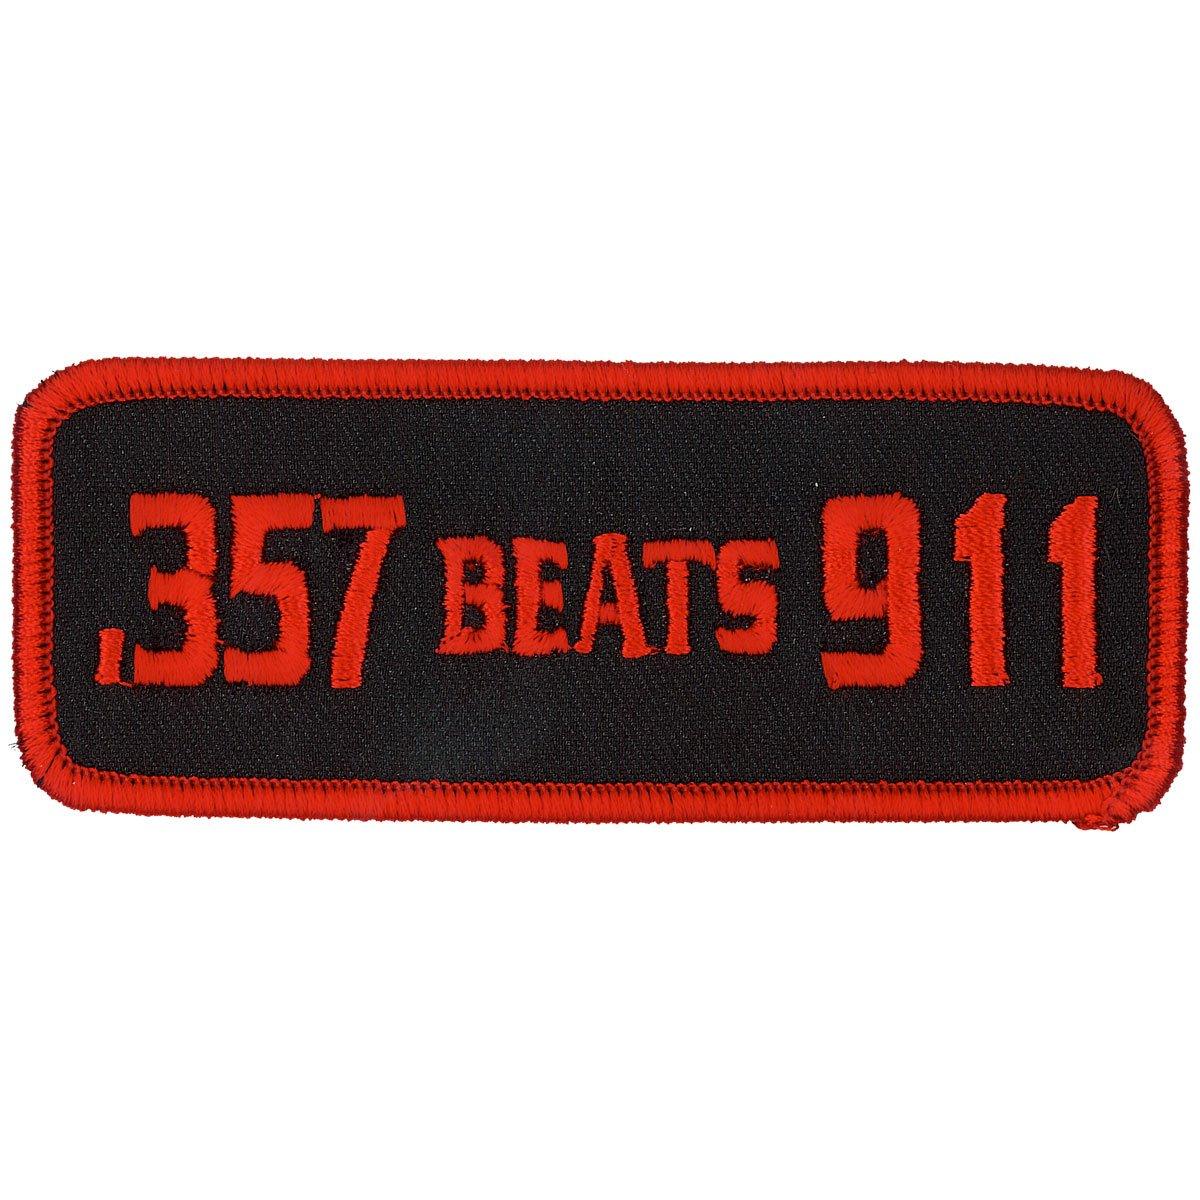 Hot Leathers 357 Beats 911 4" X 2" Patch - American Legend Rider